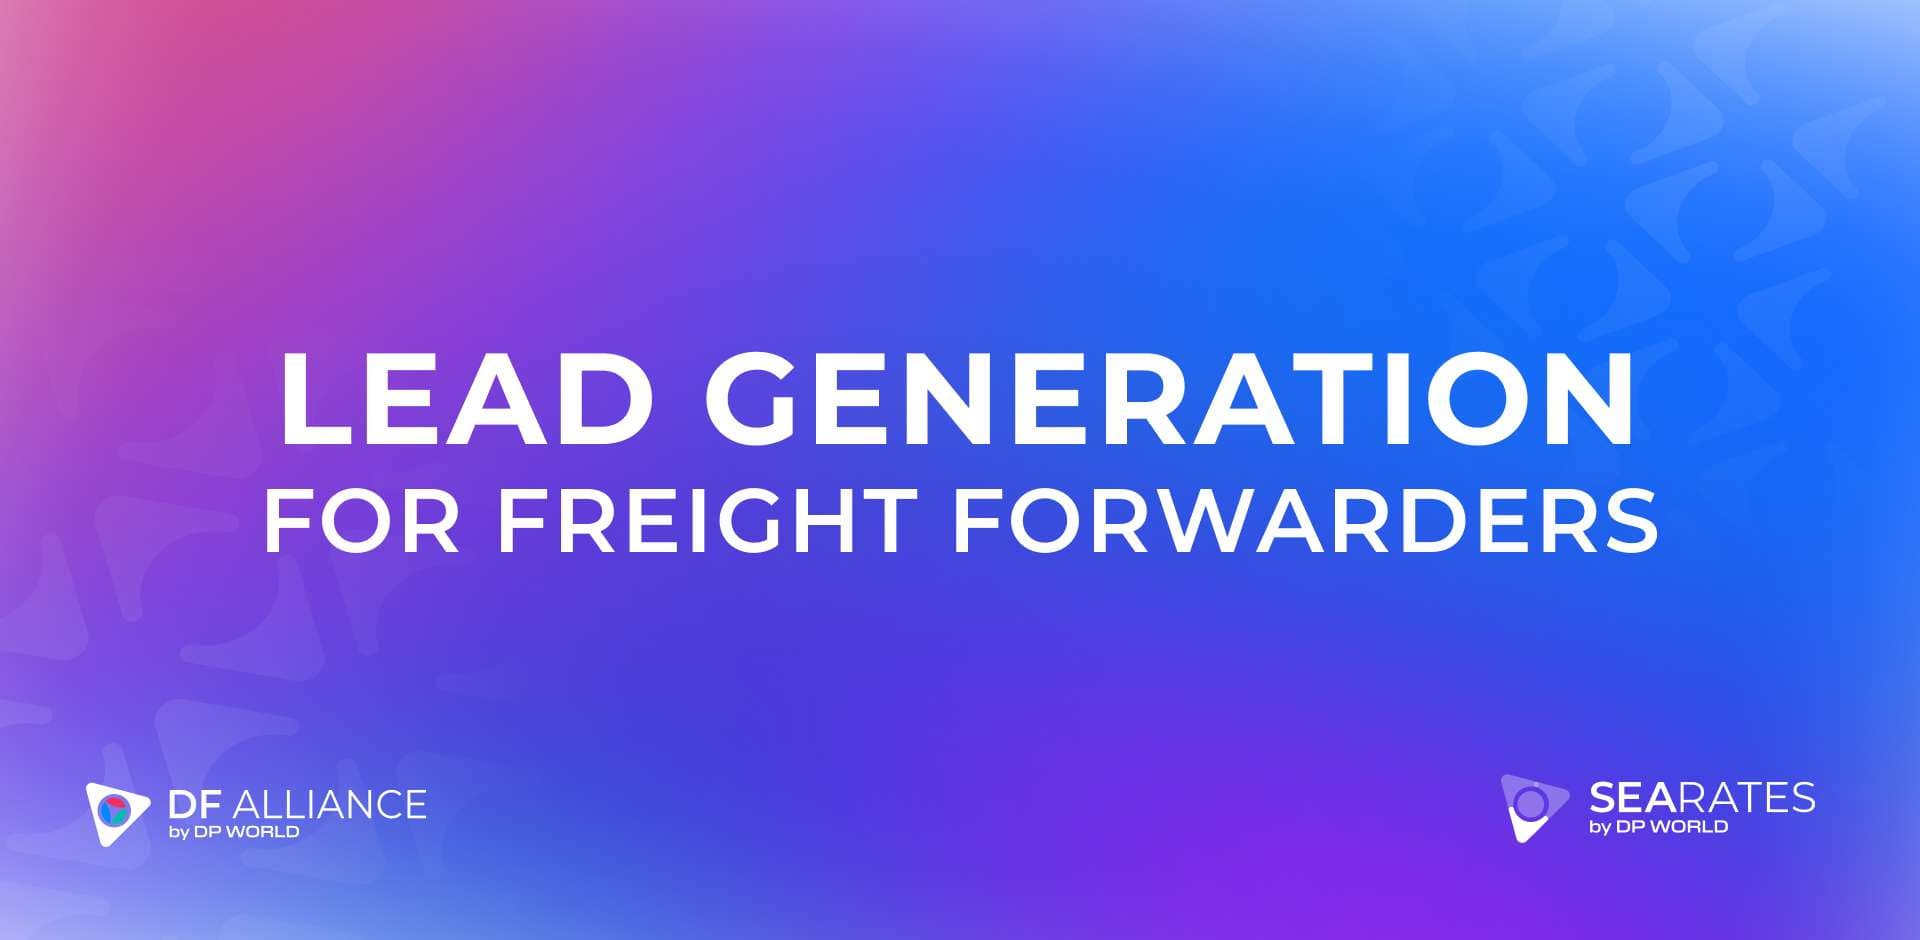 Lead Generation Capabilities for Freight Forwarders: DFA Guide